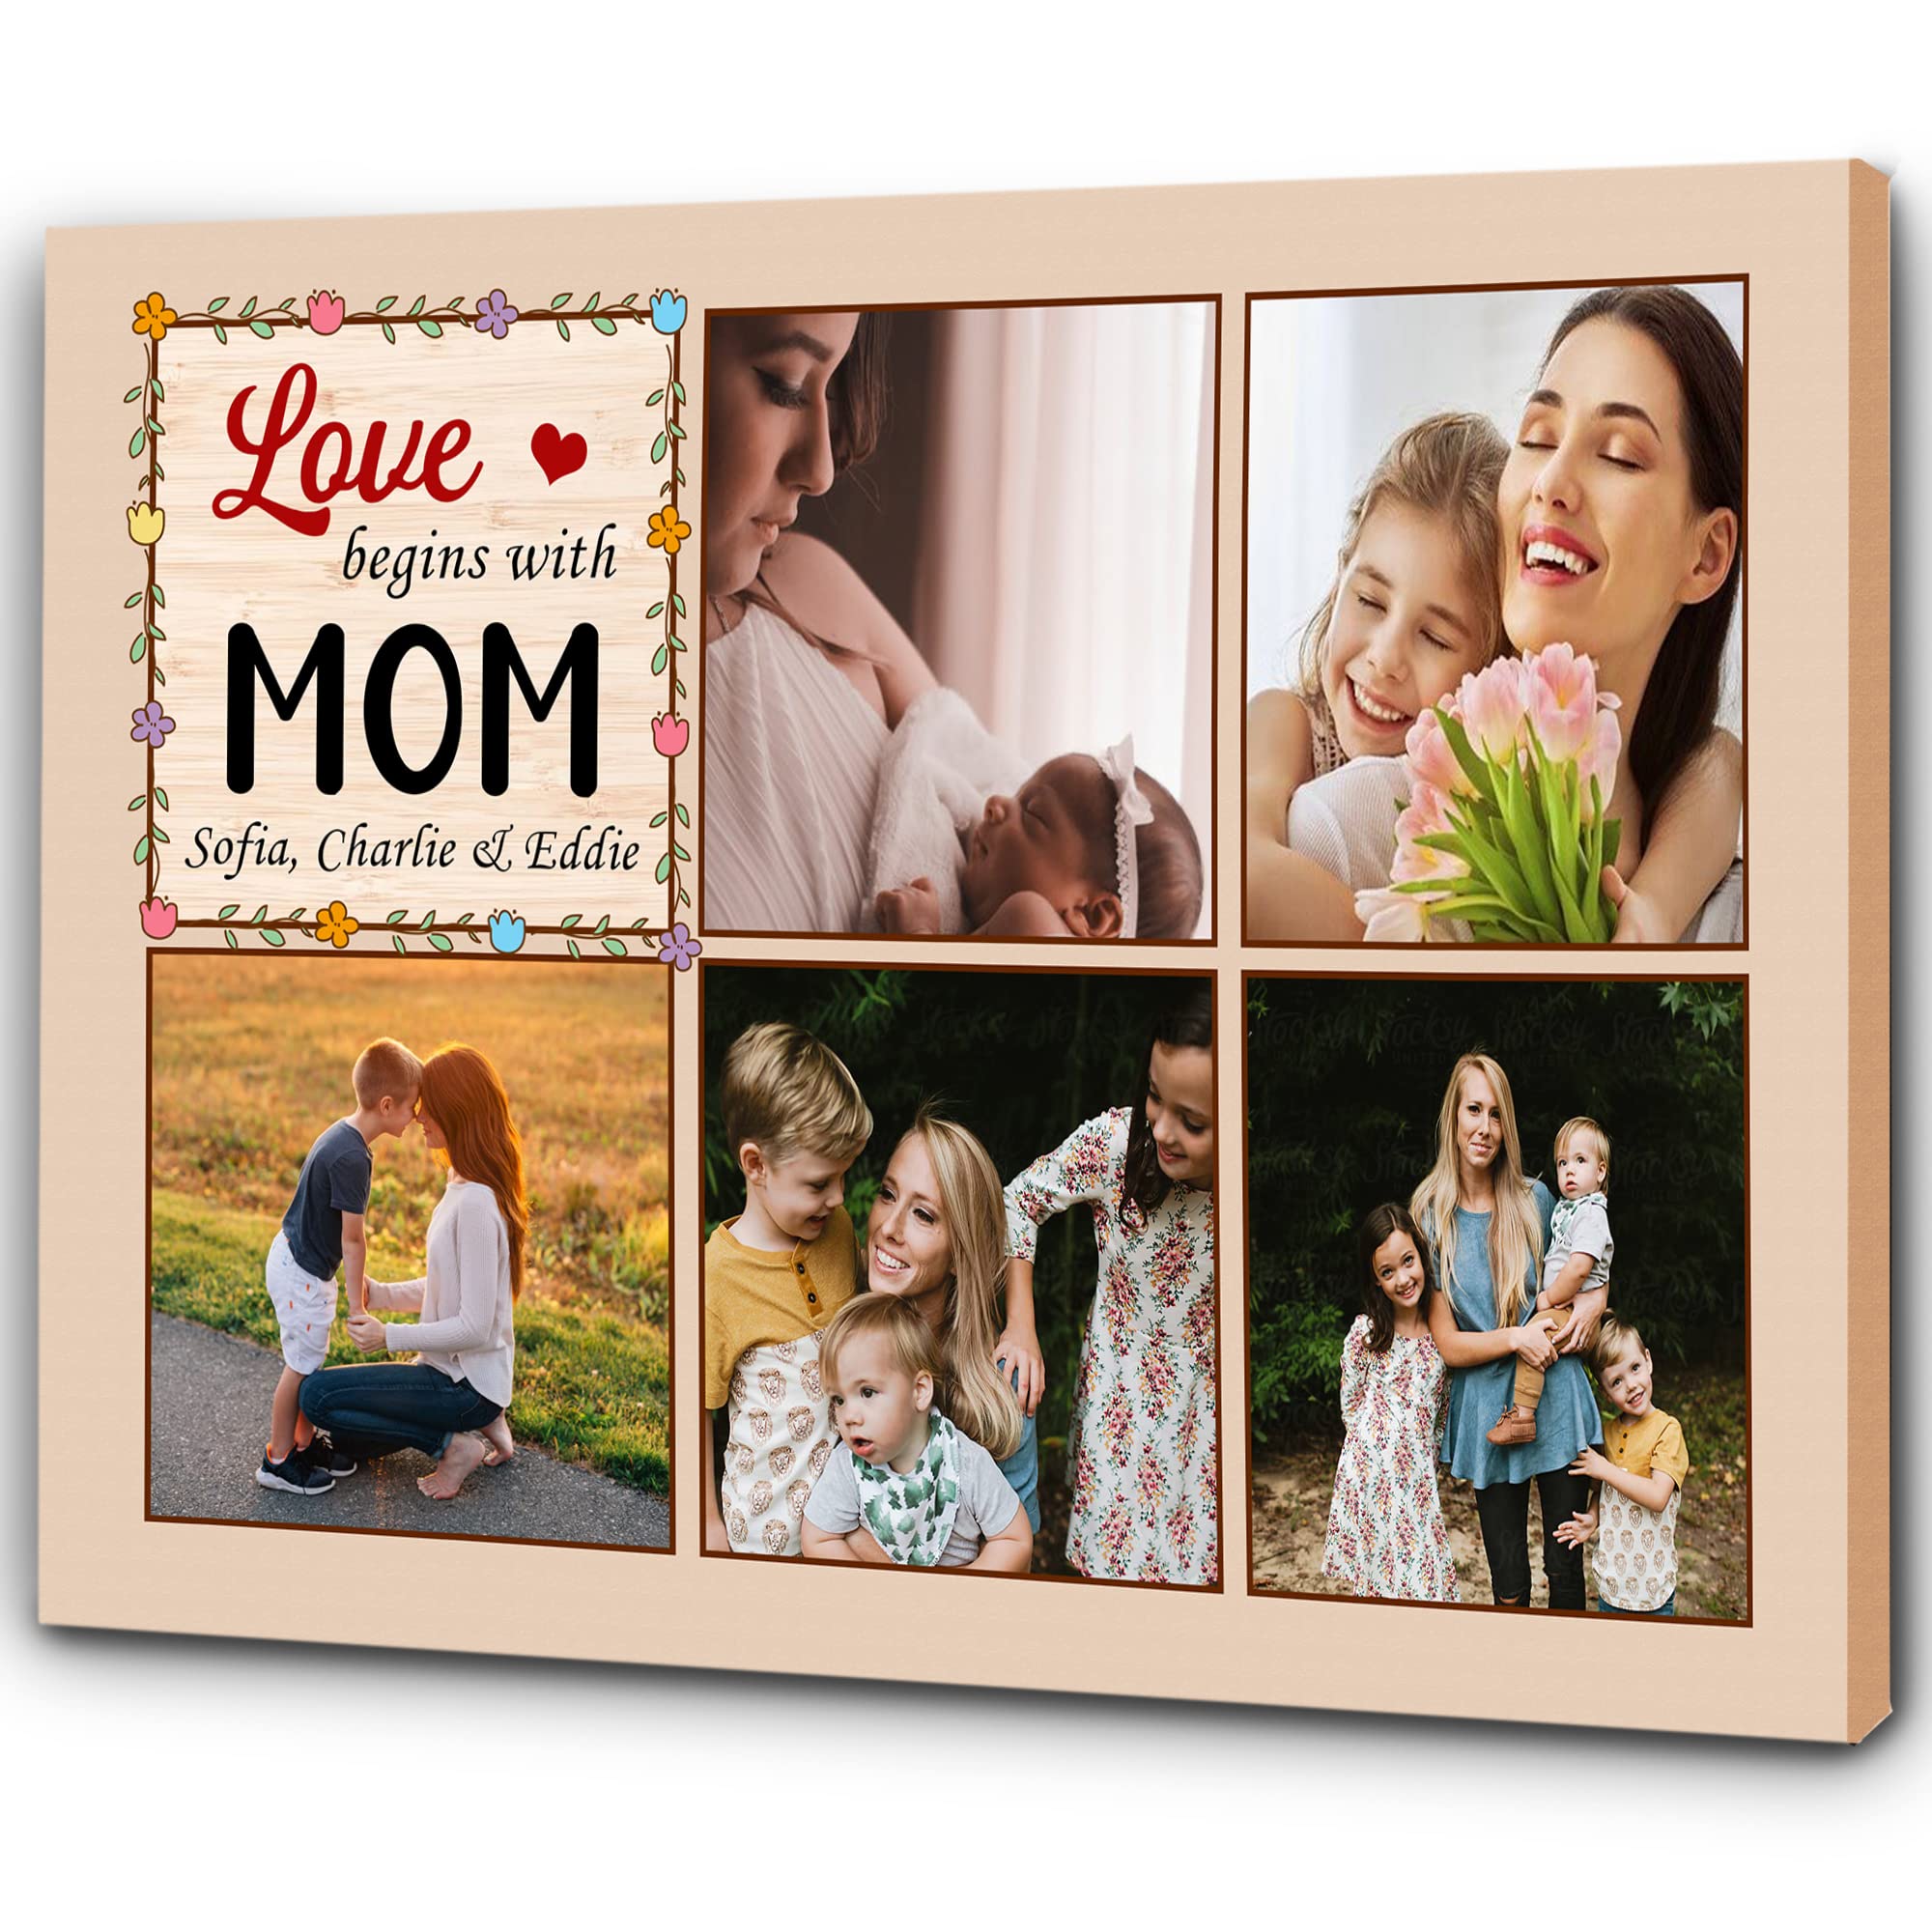 Personalized Mom Canvas. Love Begins With Mom Photo Collage Wall Art. Mother's Day Gift for Mom, Gift for Mother on Christmas Birthday. JC839 (24x16 inch)